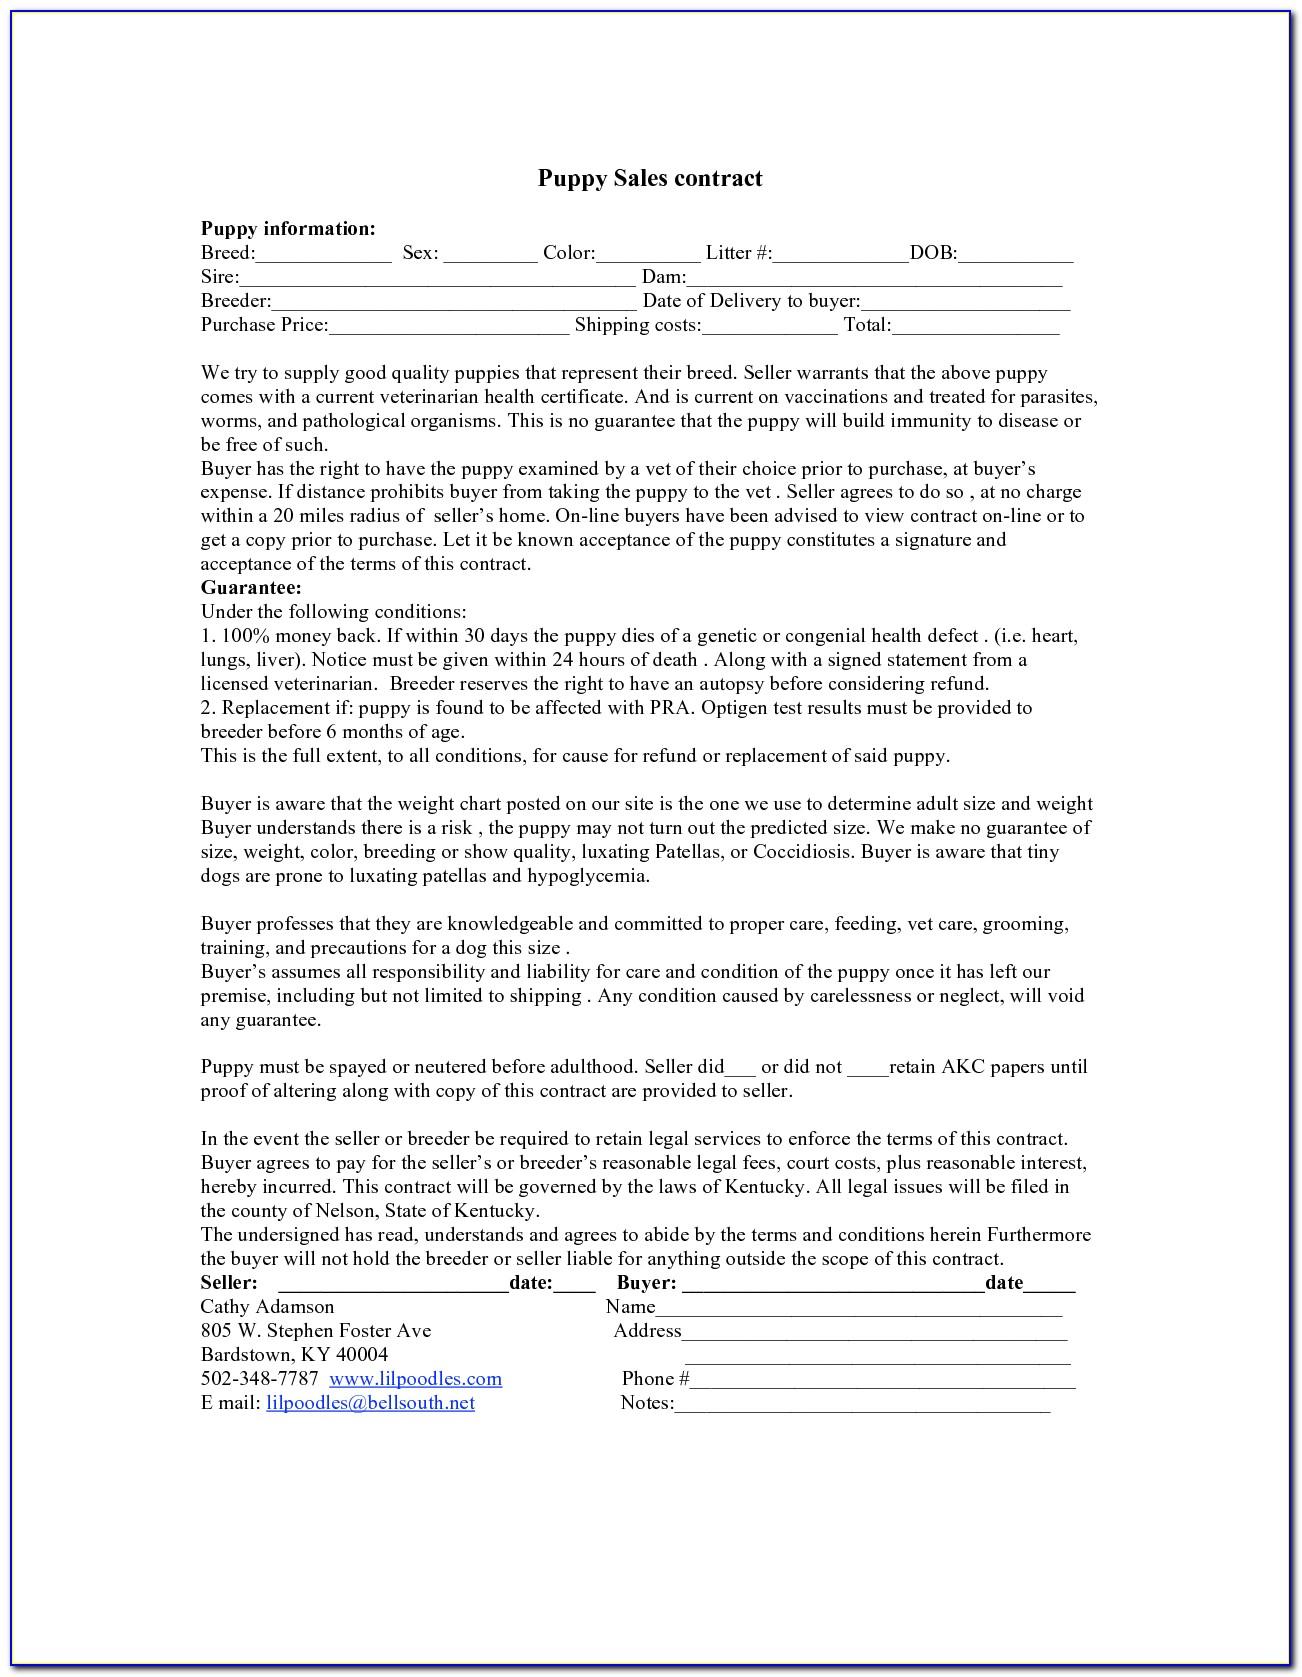 Puppy Bill Of Sale Contract Template